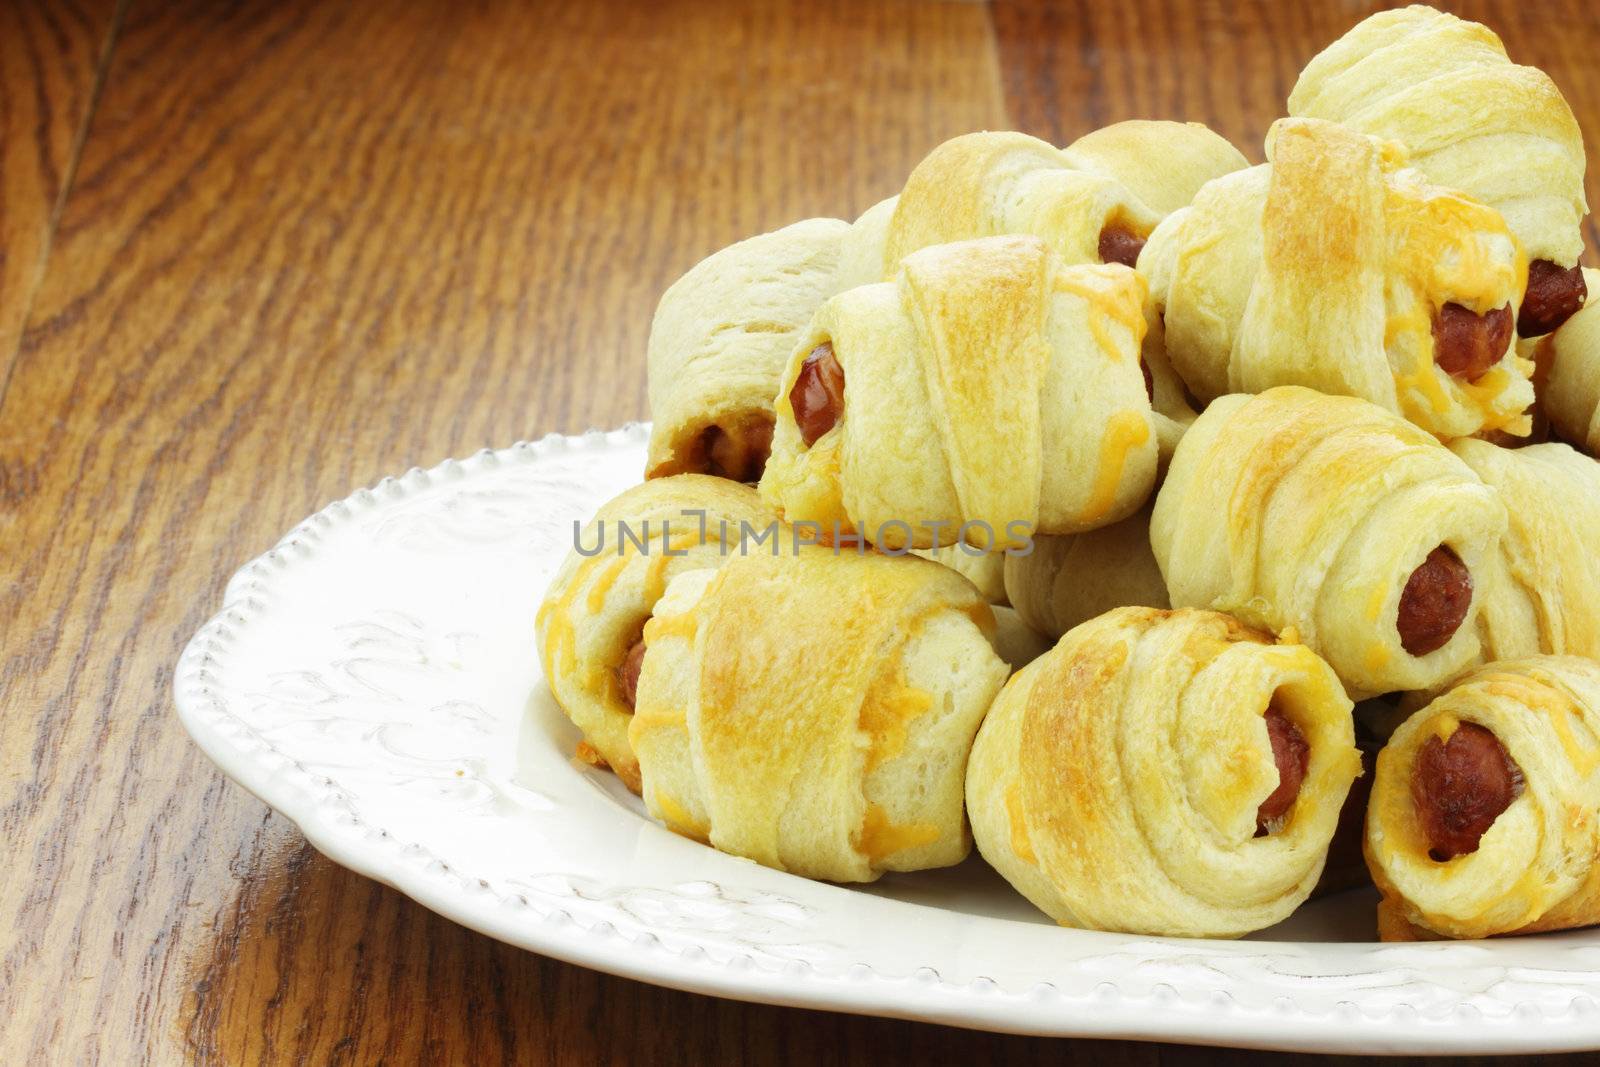 Plate of sausage rolls on a rustic wooden table.